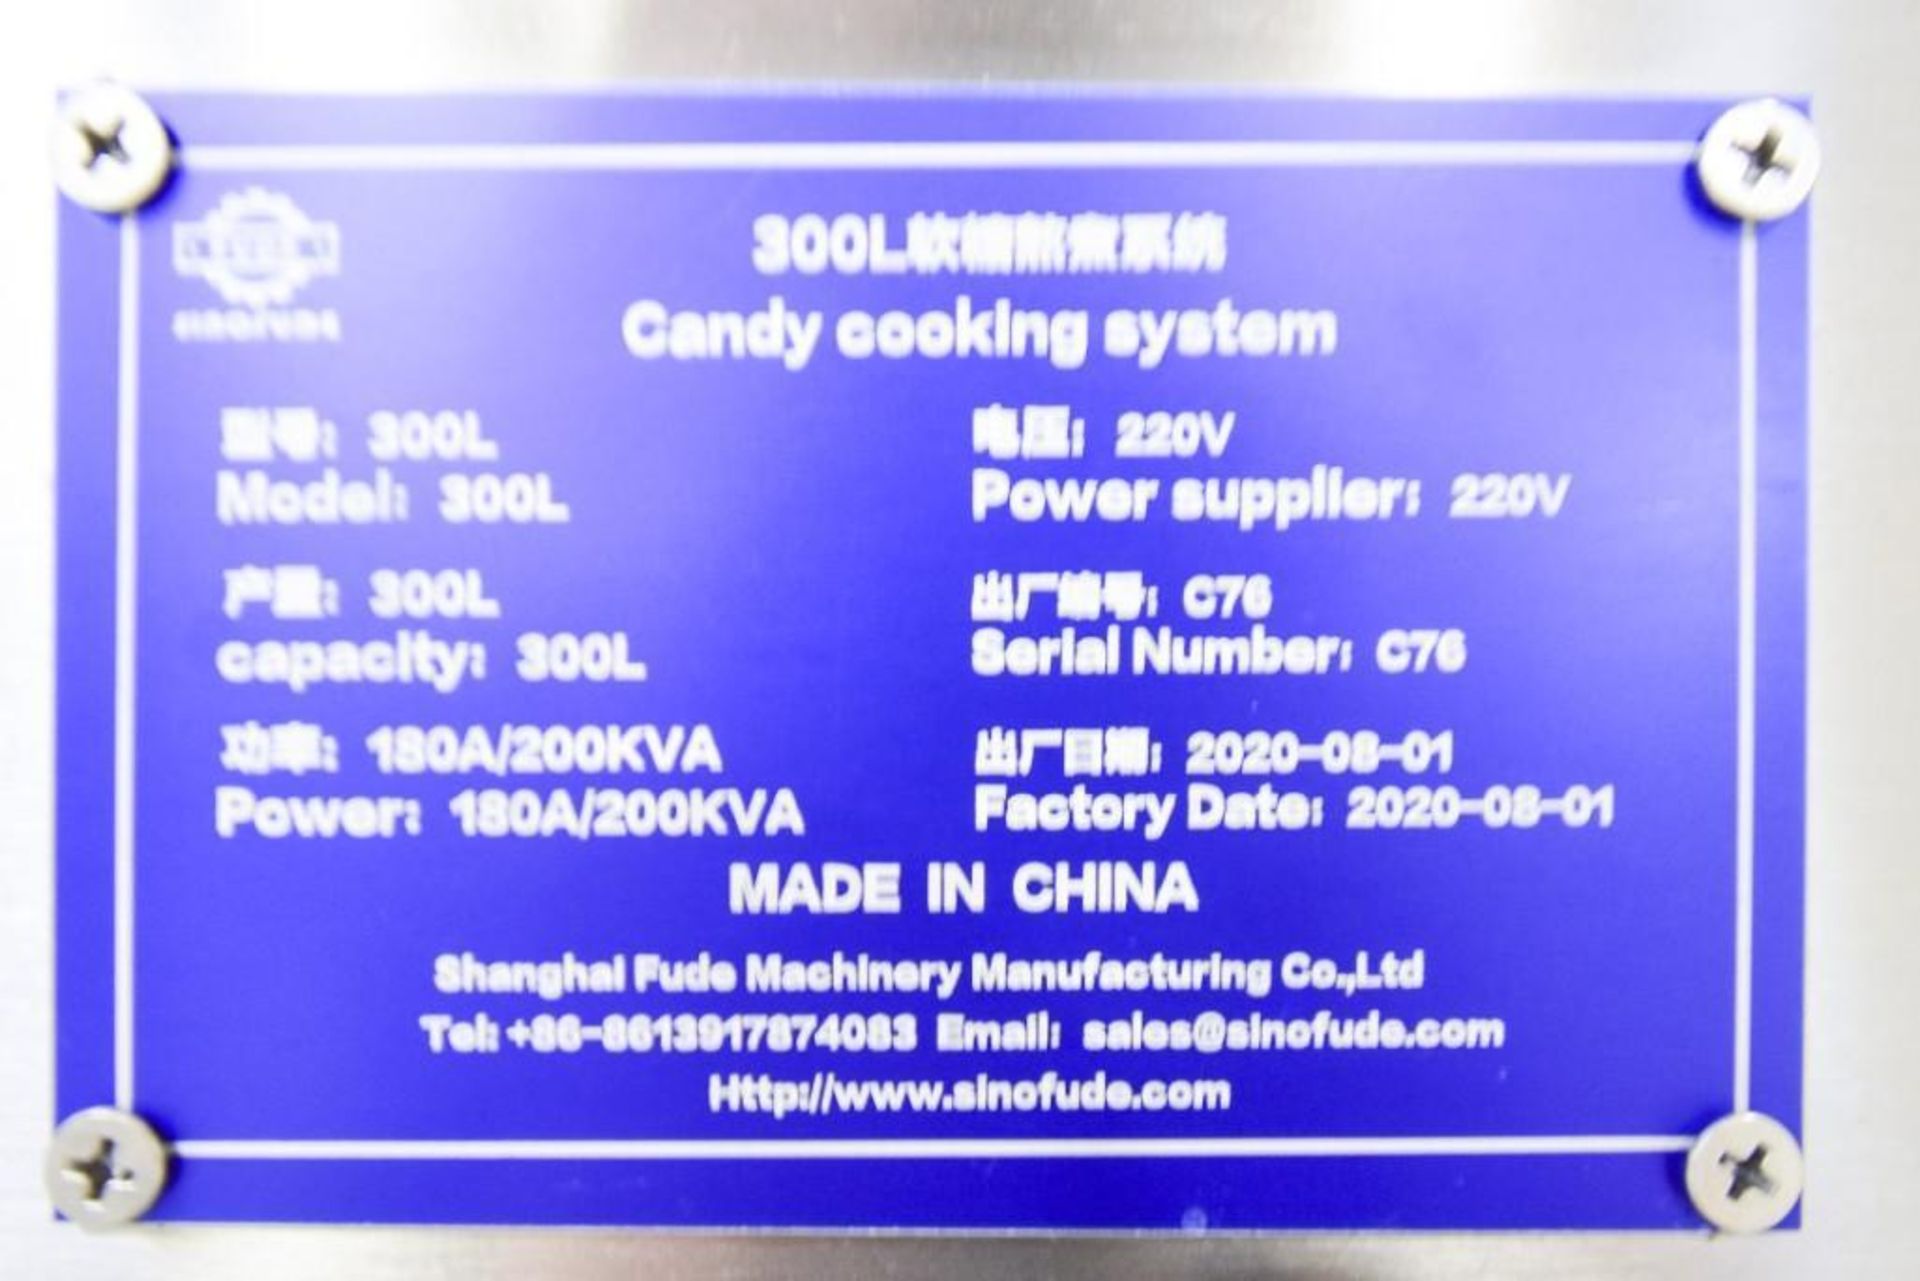 300L Candy Cooking System Mixing Kettle and Storage Kettle - Image 11 of 14